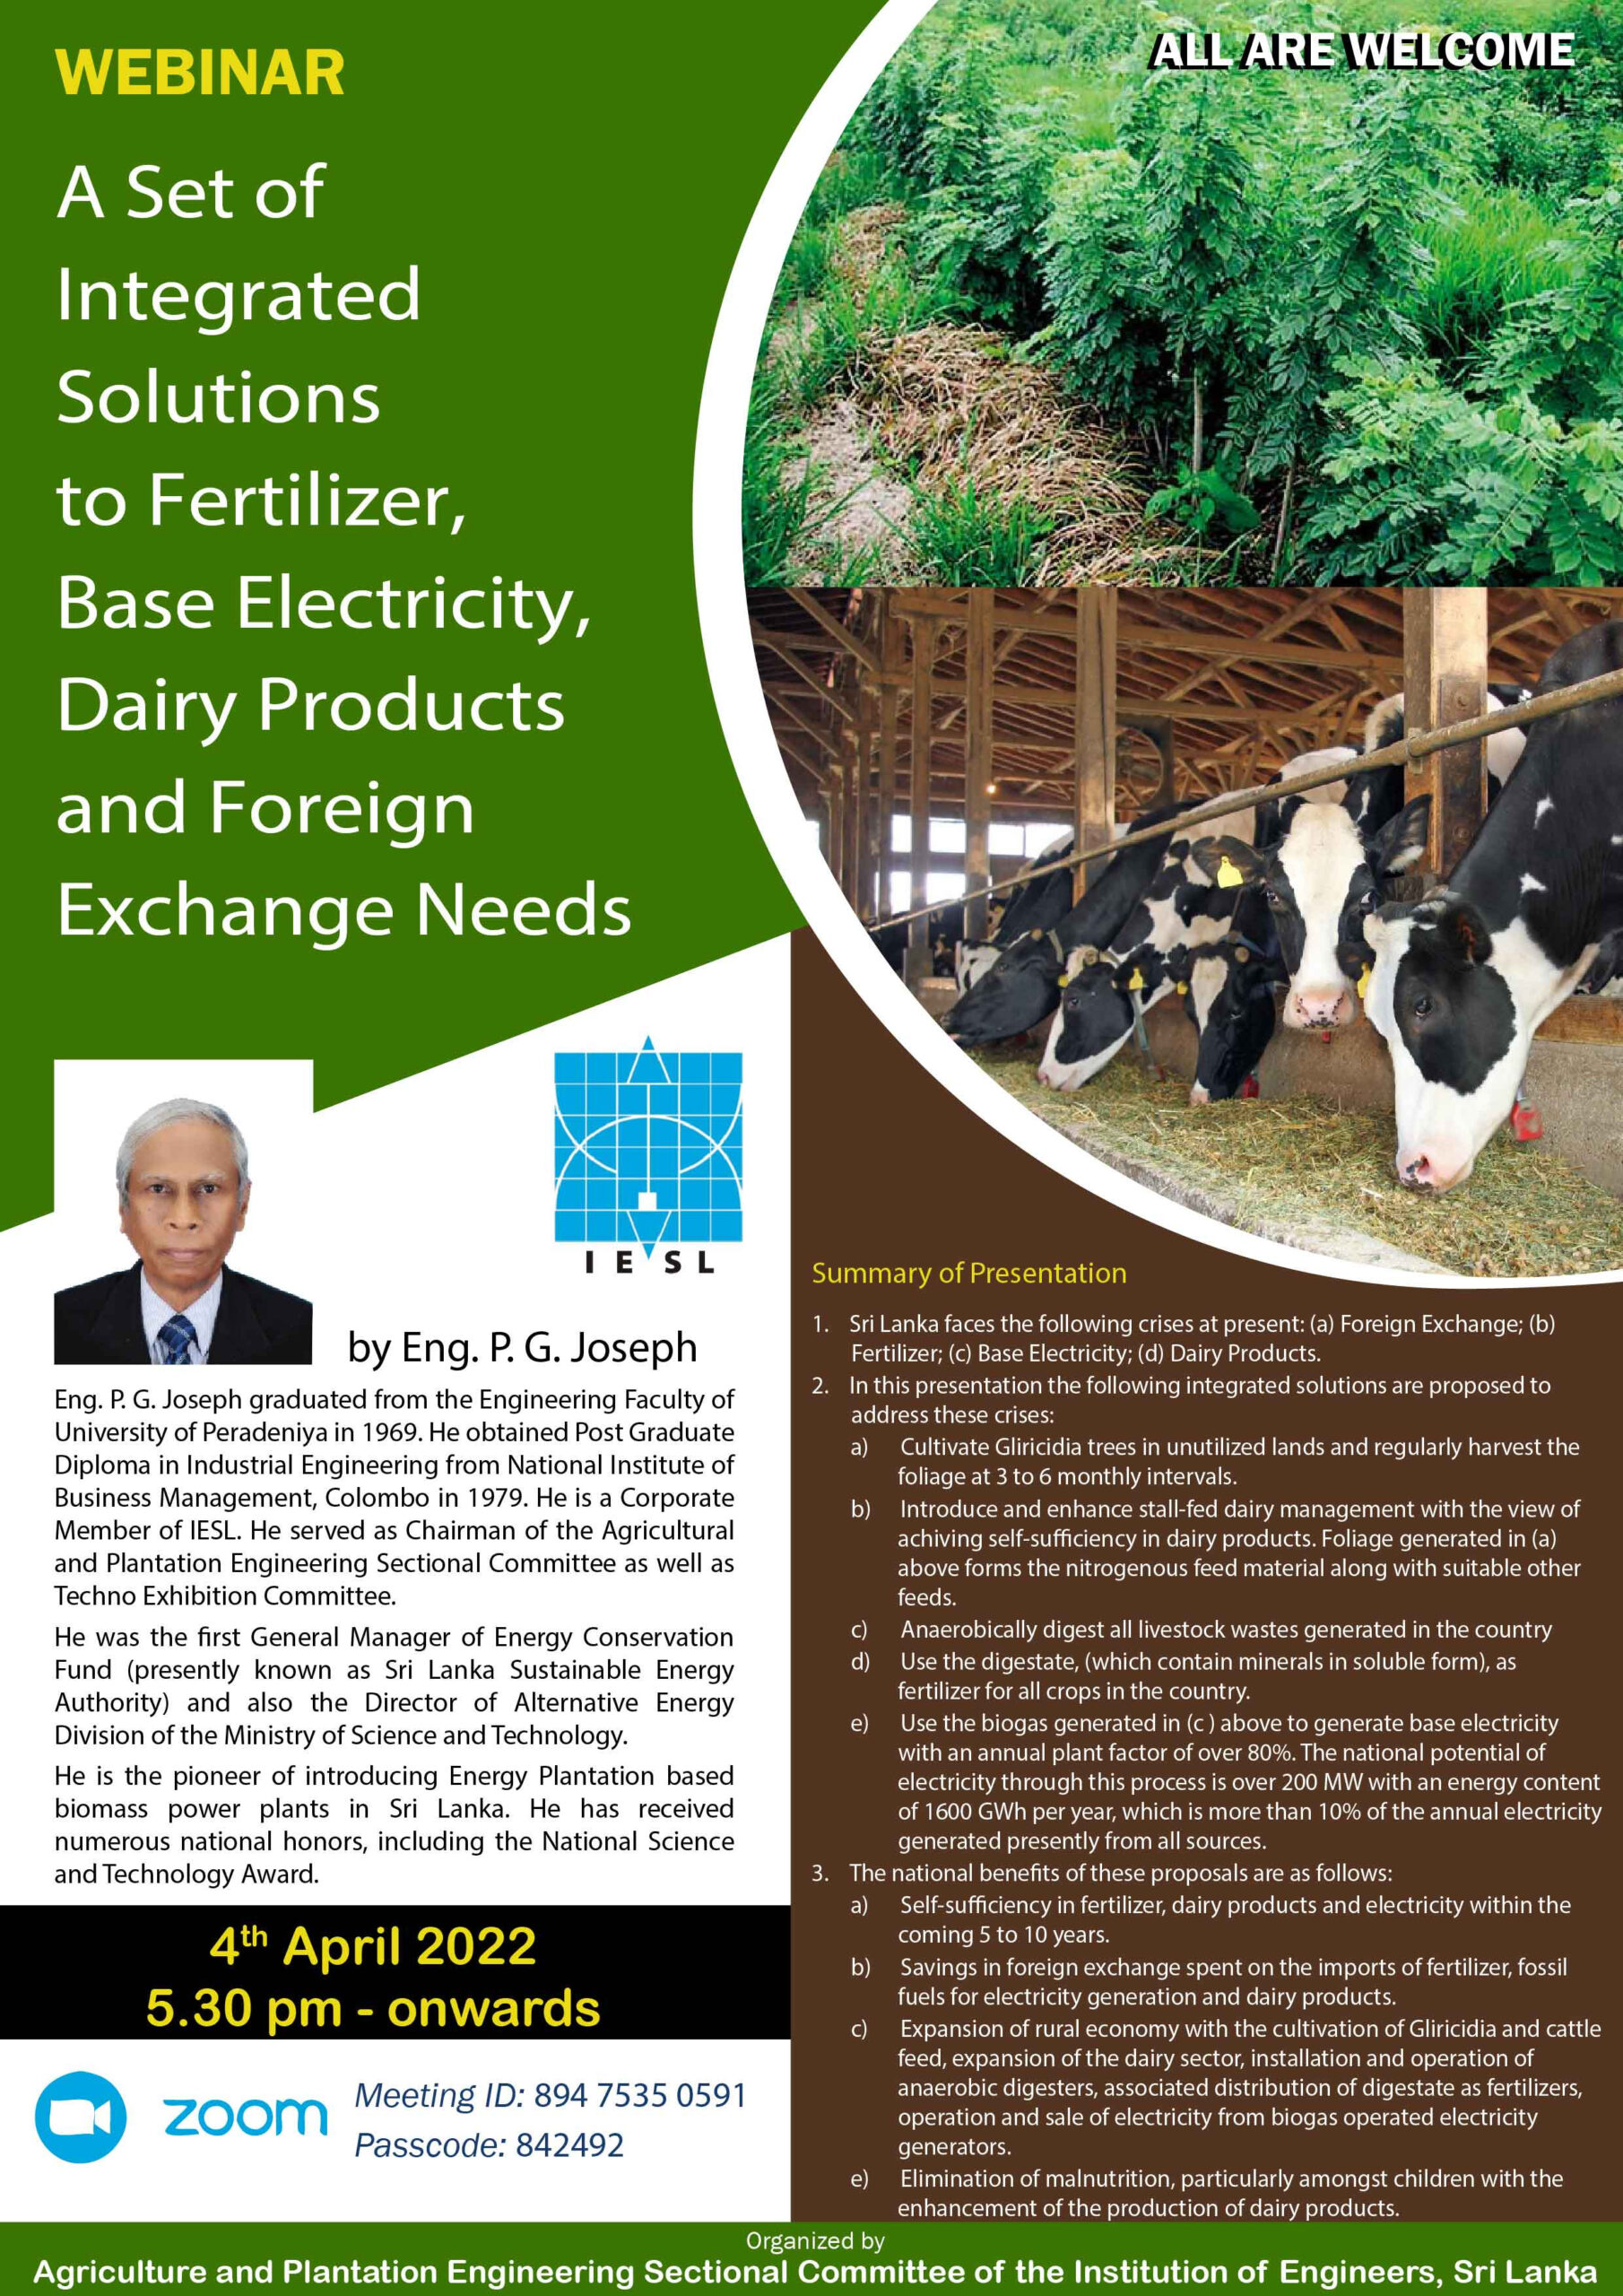 A Set of Integrated Solutions to Fertilizer, Base Electricity, Dairy Products and Foreign Exchange Needs